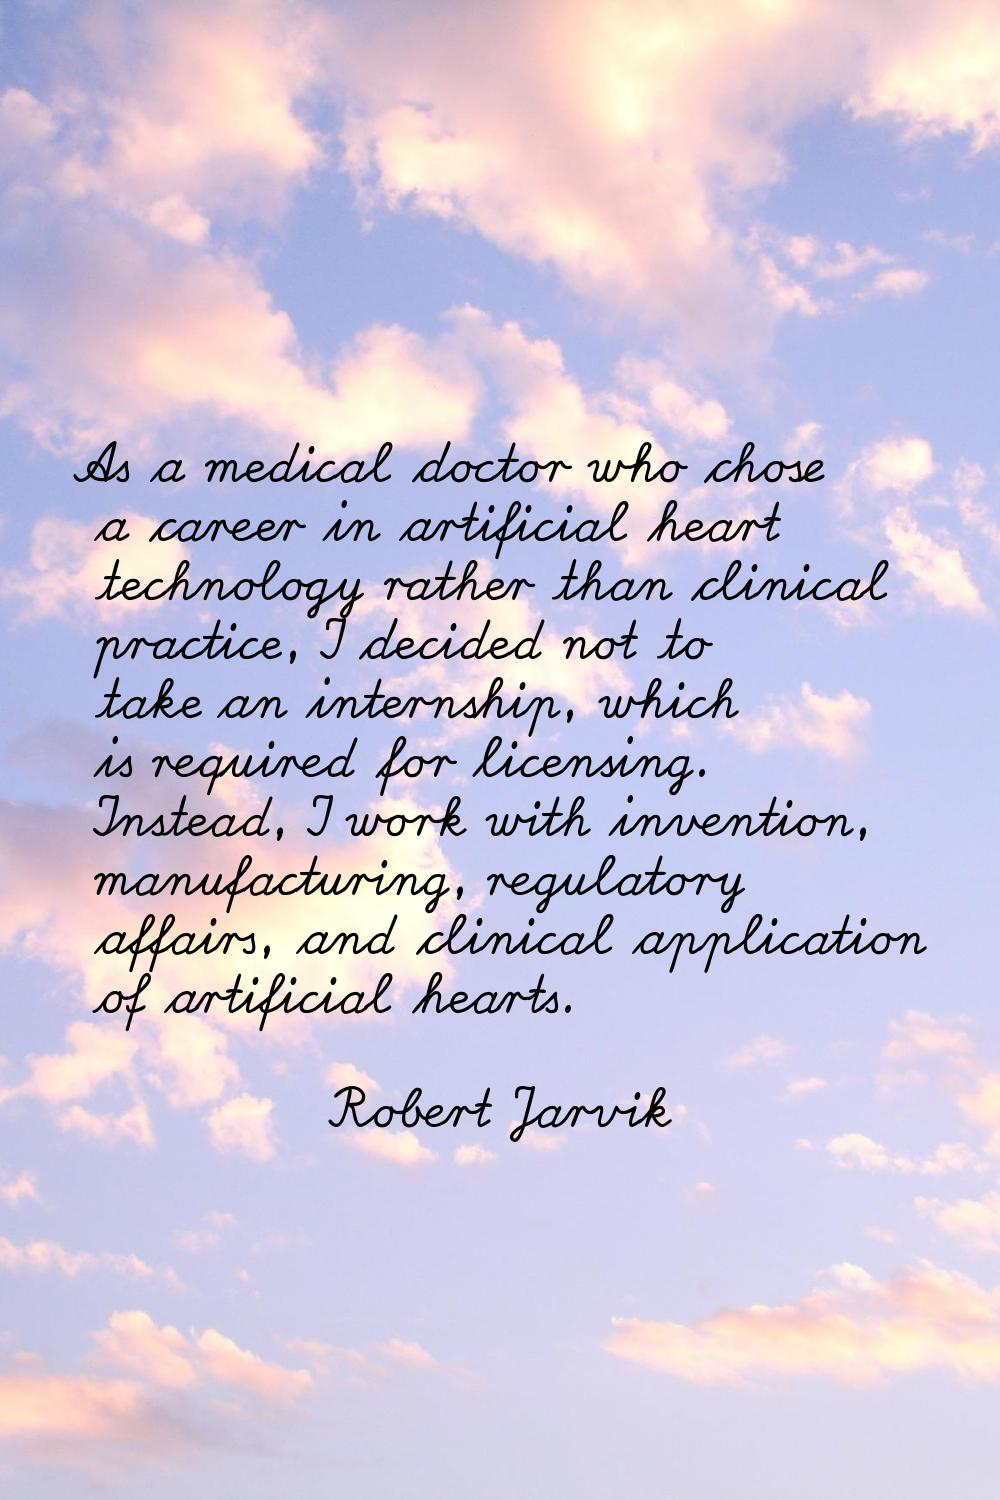 As a medical doctor who chose a career in artificial heart technology rather than clinical practice